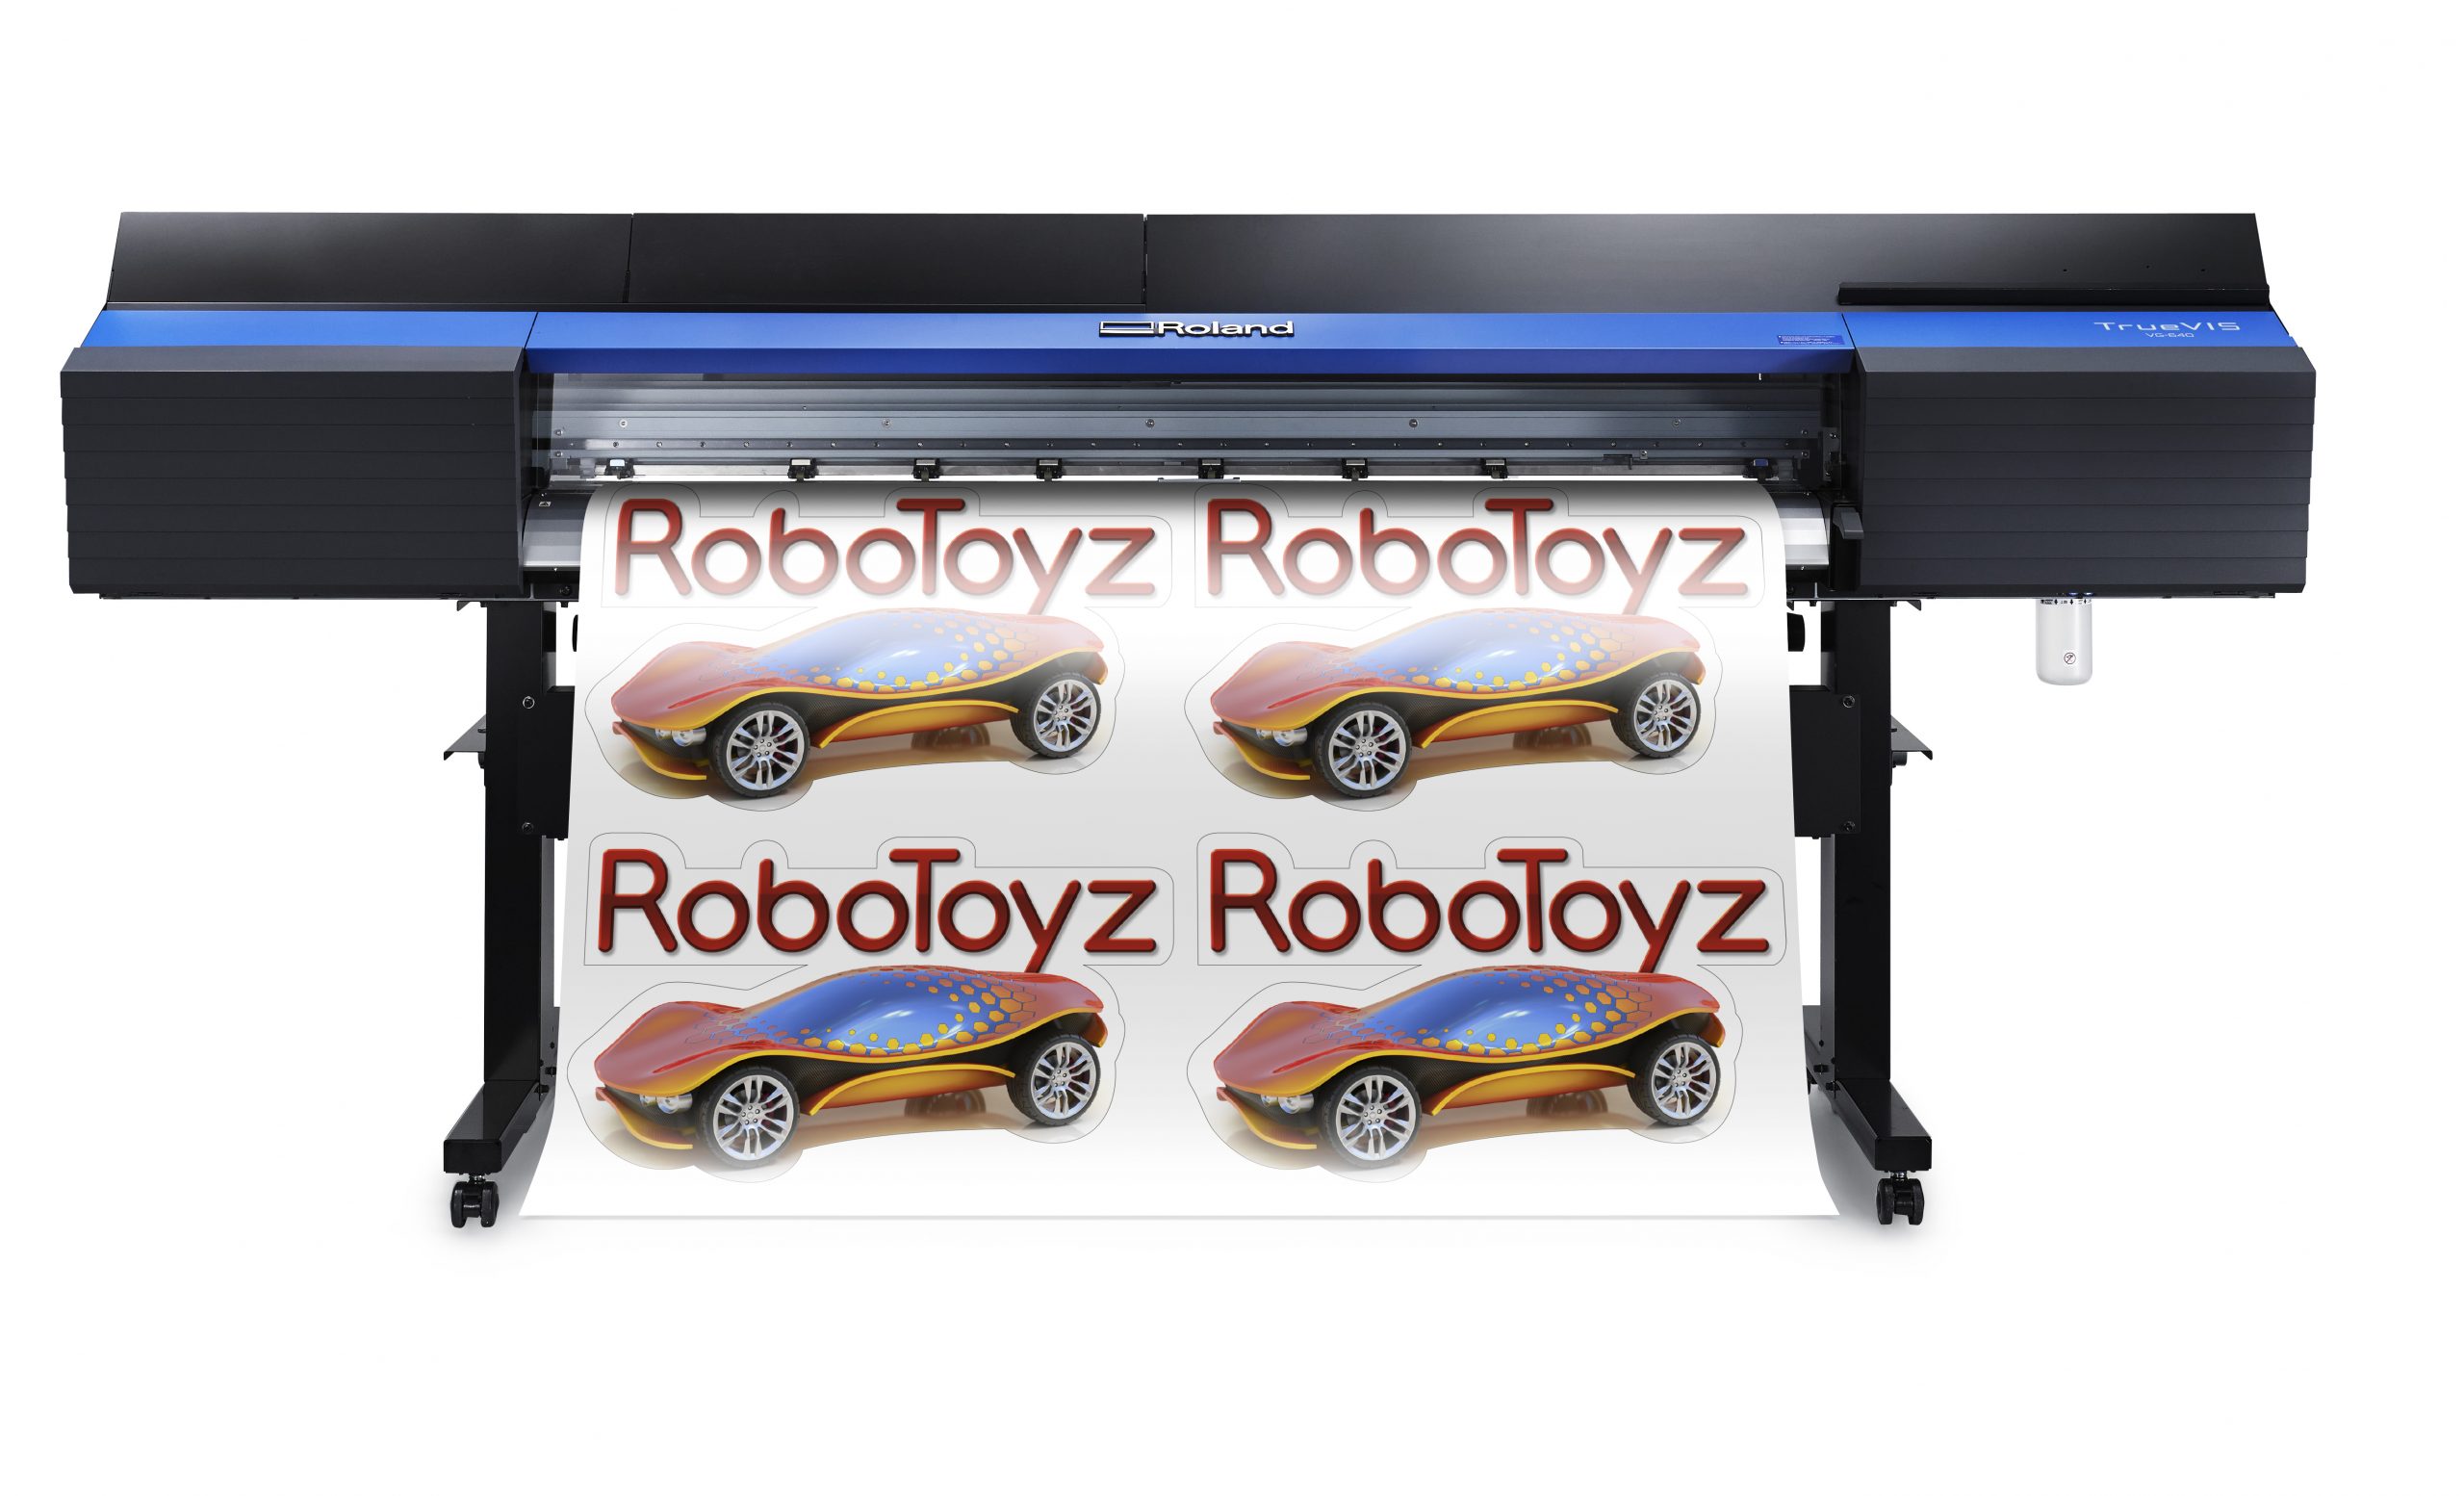 Absolute Toner $259/Month (4 NEW HEADS) Roland TrueVIS VG-540 ( VG540) 54" Inches TR2 Eco-Solvent Wide Format Plotter Printer Printer/Cutter (Print and Cut) Print and Cut Plotters